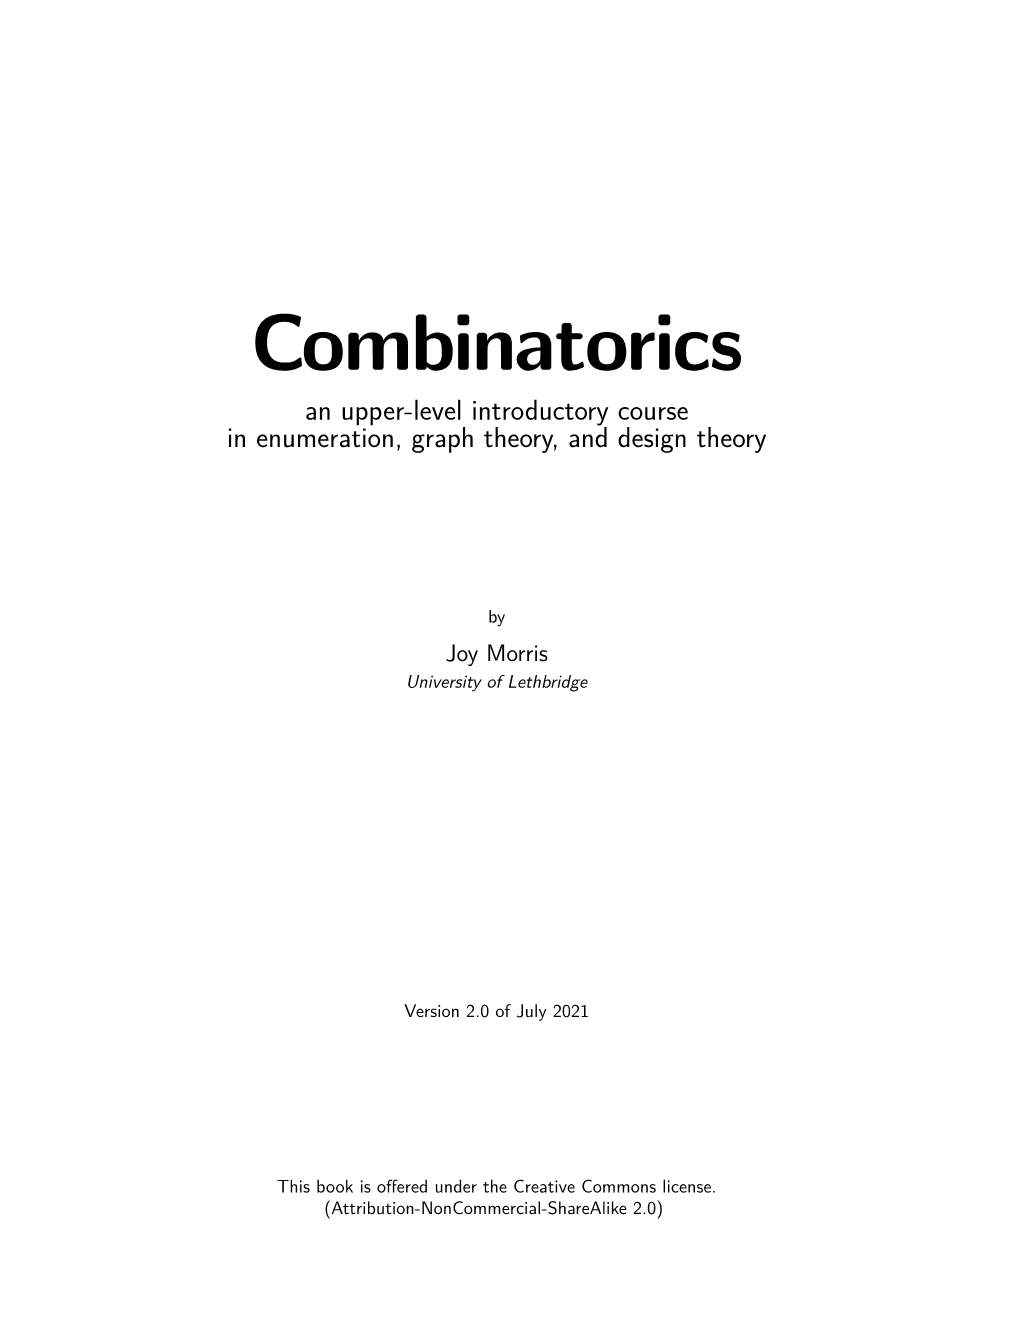 Combinatorics an Upper-Level Introductory Course in Enumeration, Graph Theory, and Design Theory